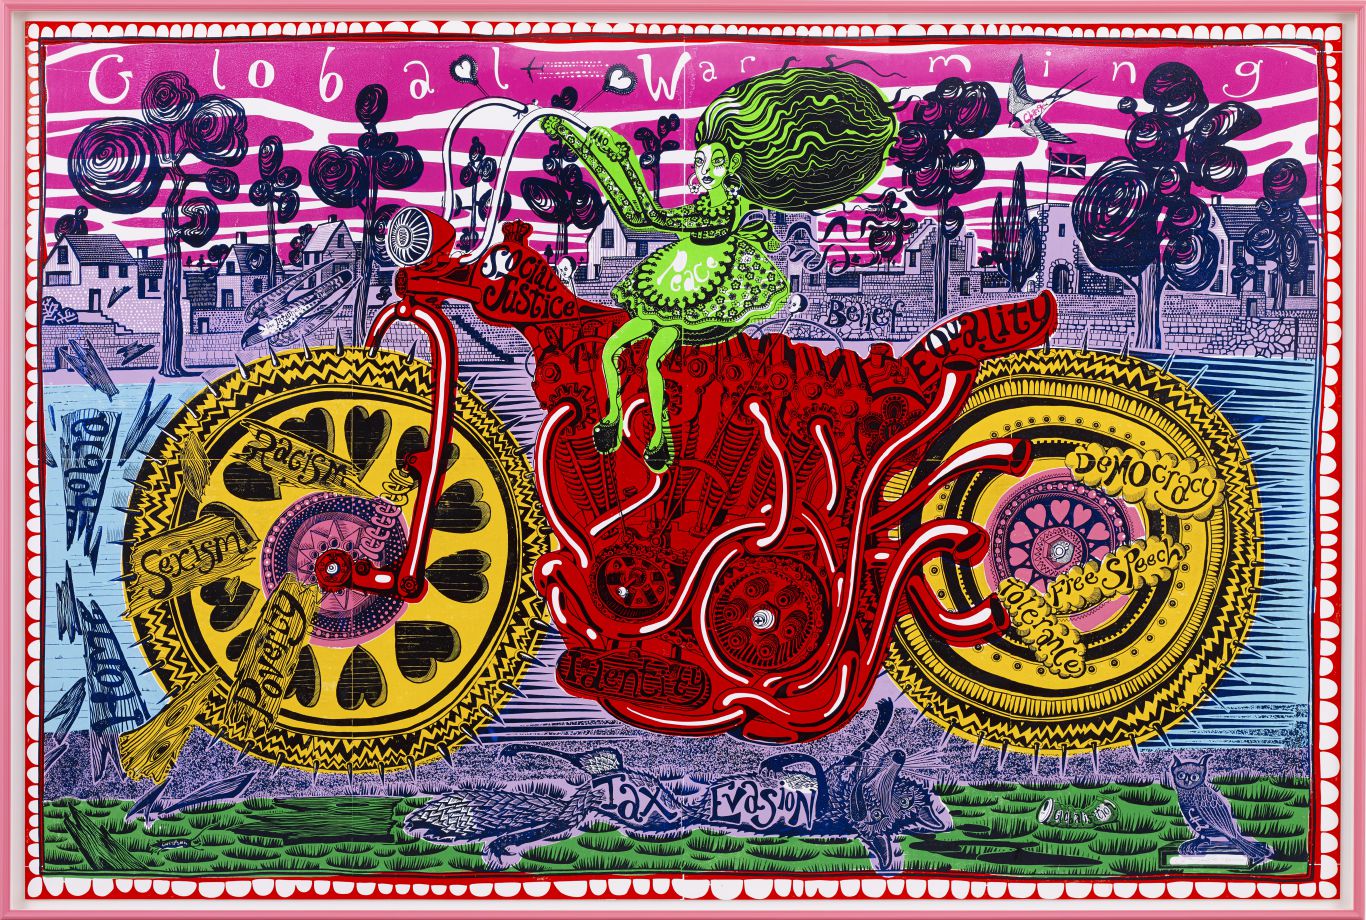 Grayson Perry's selfie from the Summer Exhibition - a green goblin on a big yellow bicycle